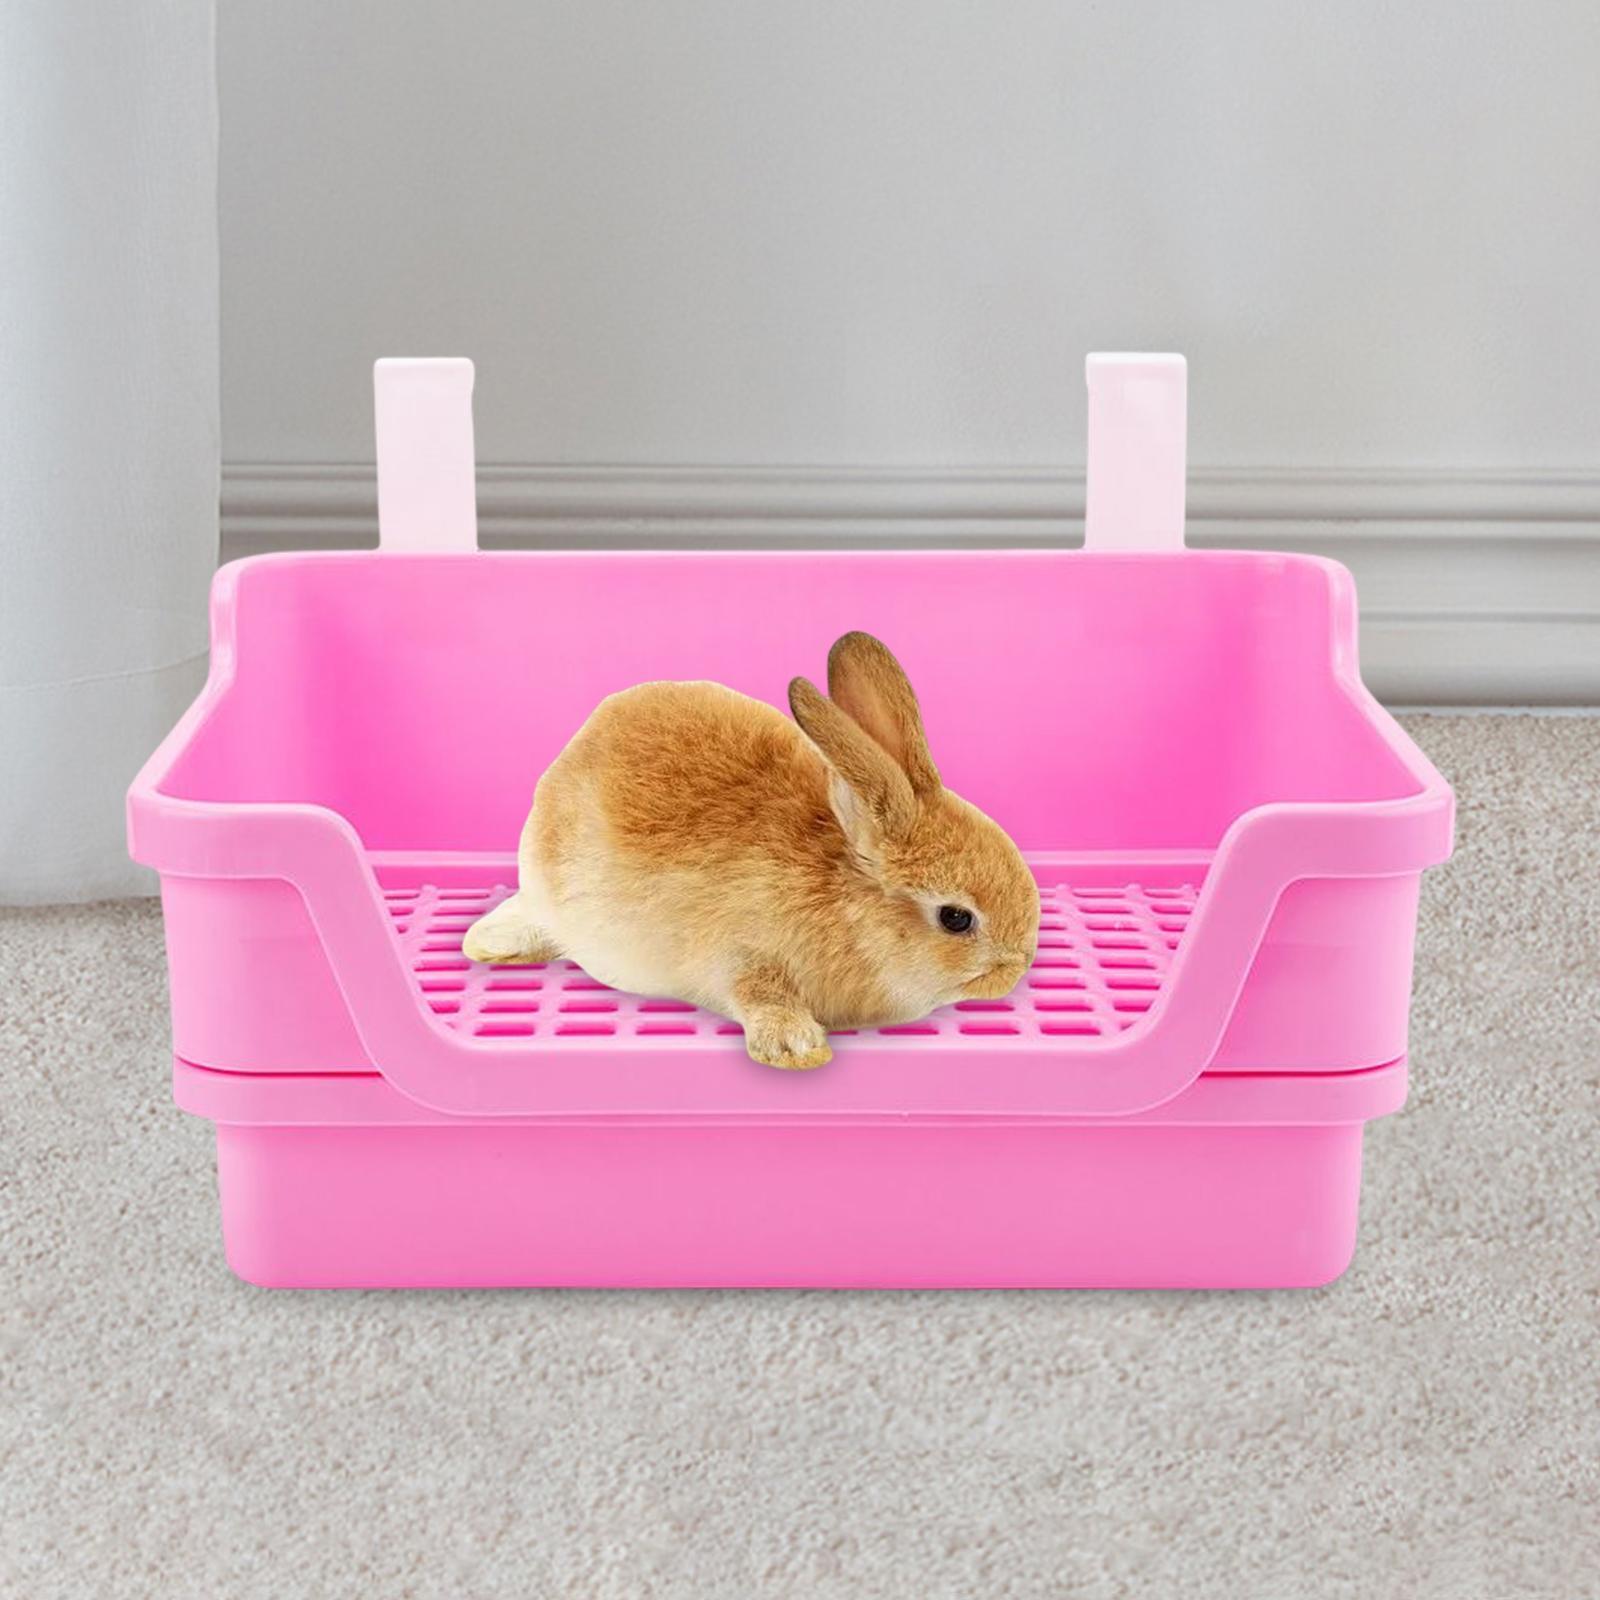 Litter Tray Toilet Pink